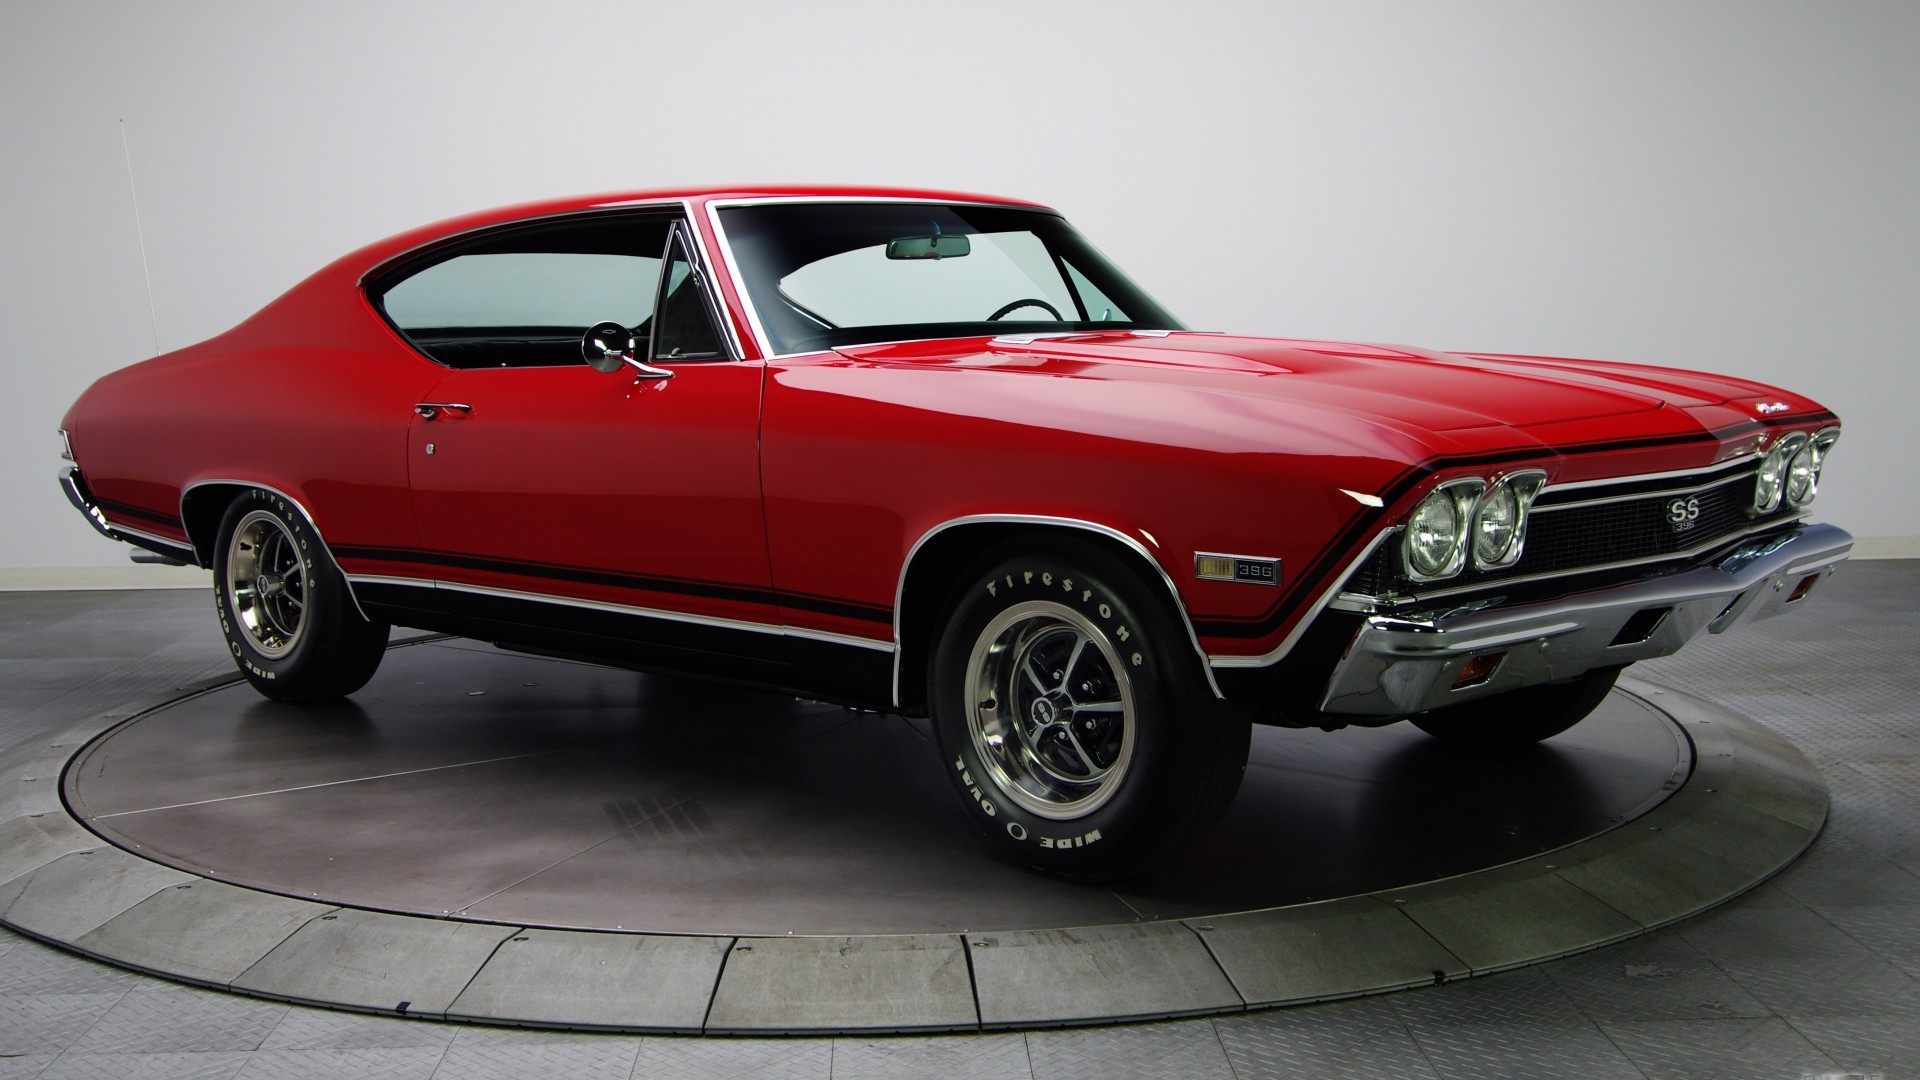 General 1920x1080 red cars vehicle simple background Chevrolet Chevrolet Chevelle